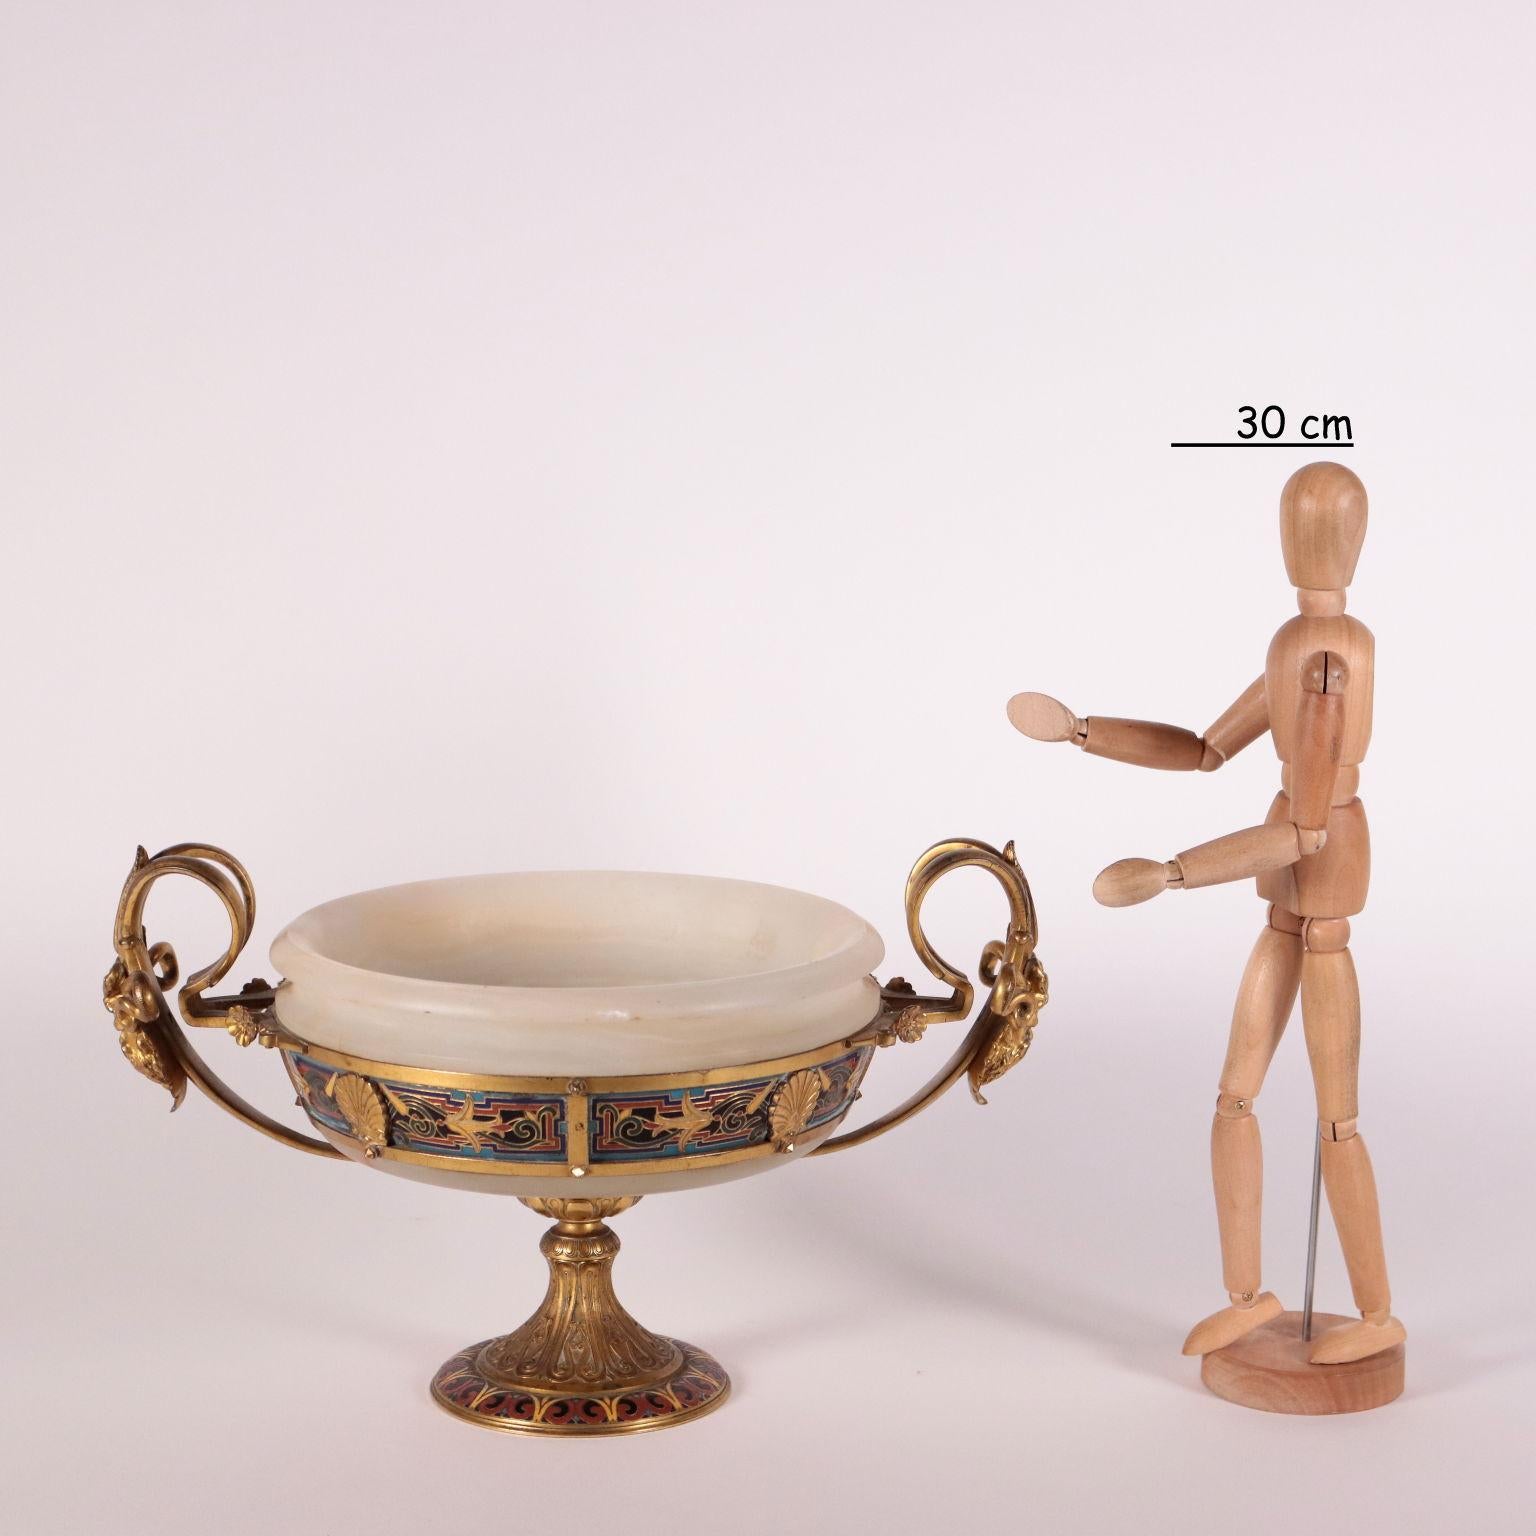 Alabaster goblet held by a gilded bronze support with an enameled decoration realized with the champleve technique. The base is shaped as an upside down goblet and holds a circular bronze structure with enameled vegetal themed decorations. Handles